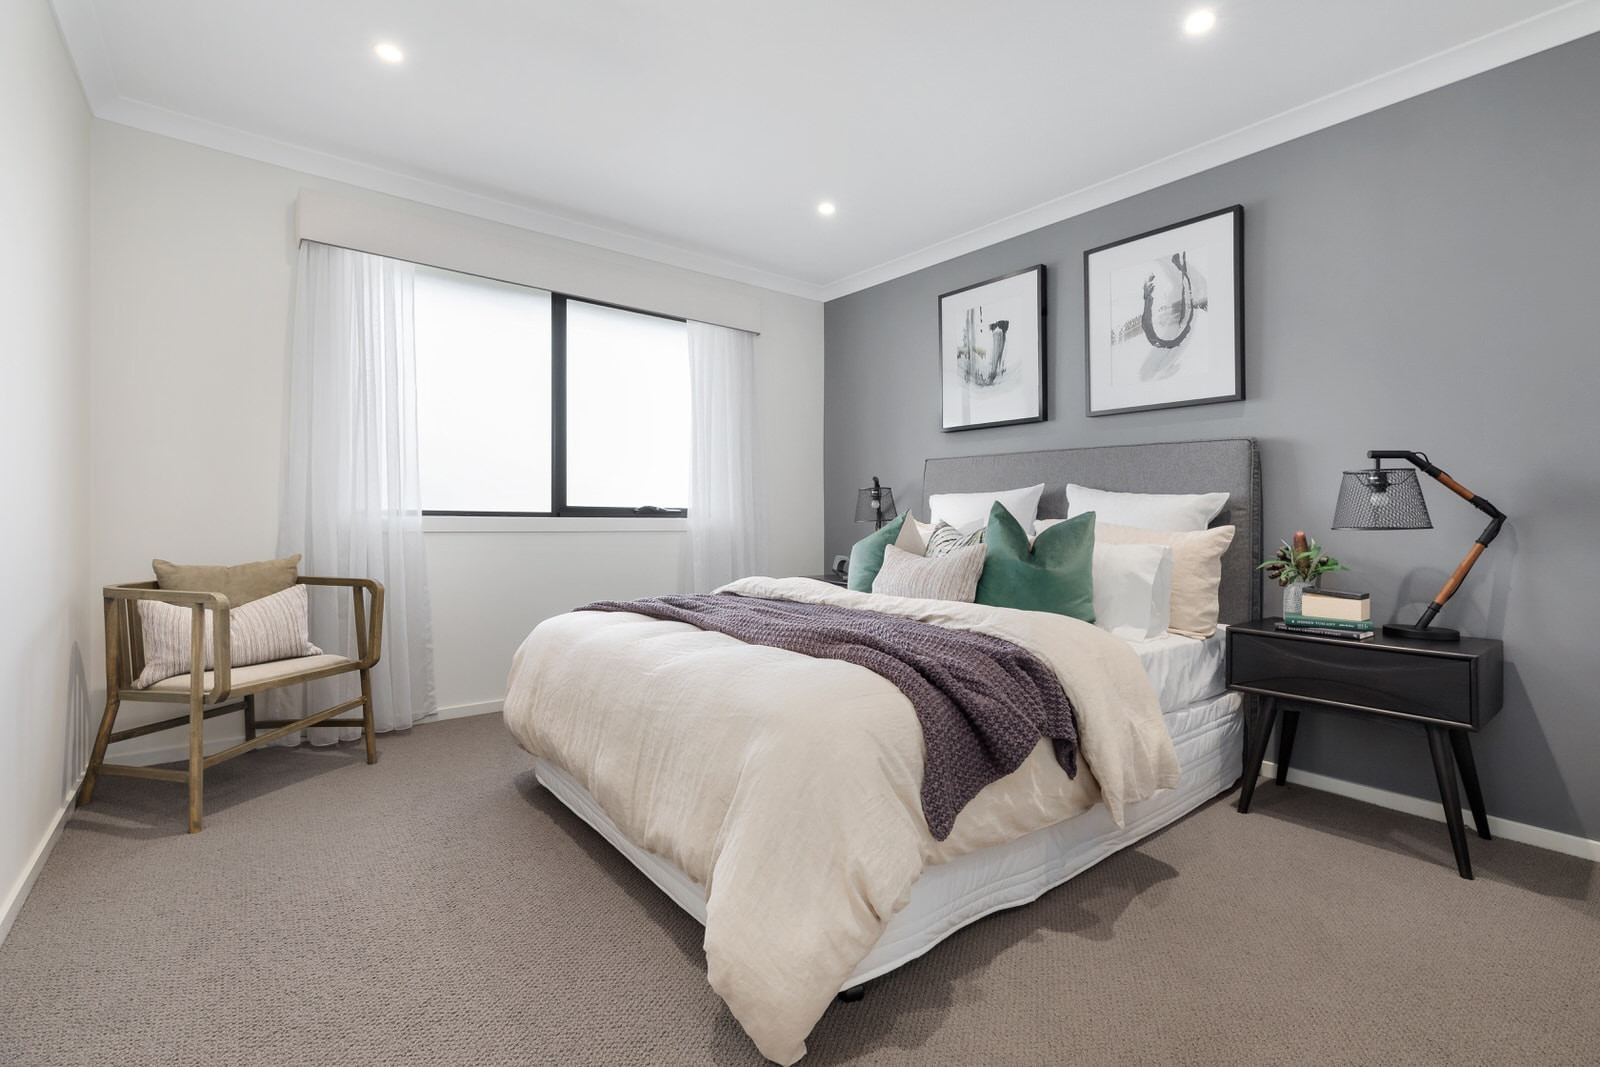 Light Grey Bedroom Walls
 Need Help Decorating a Holiday Rental I Got You Covered